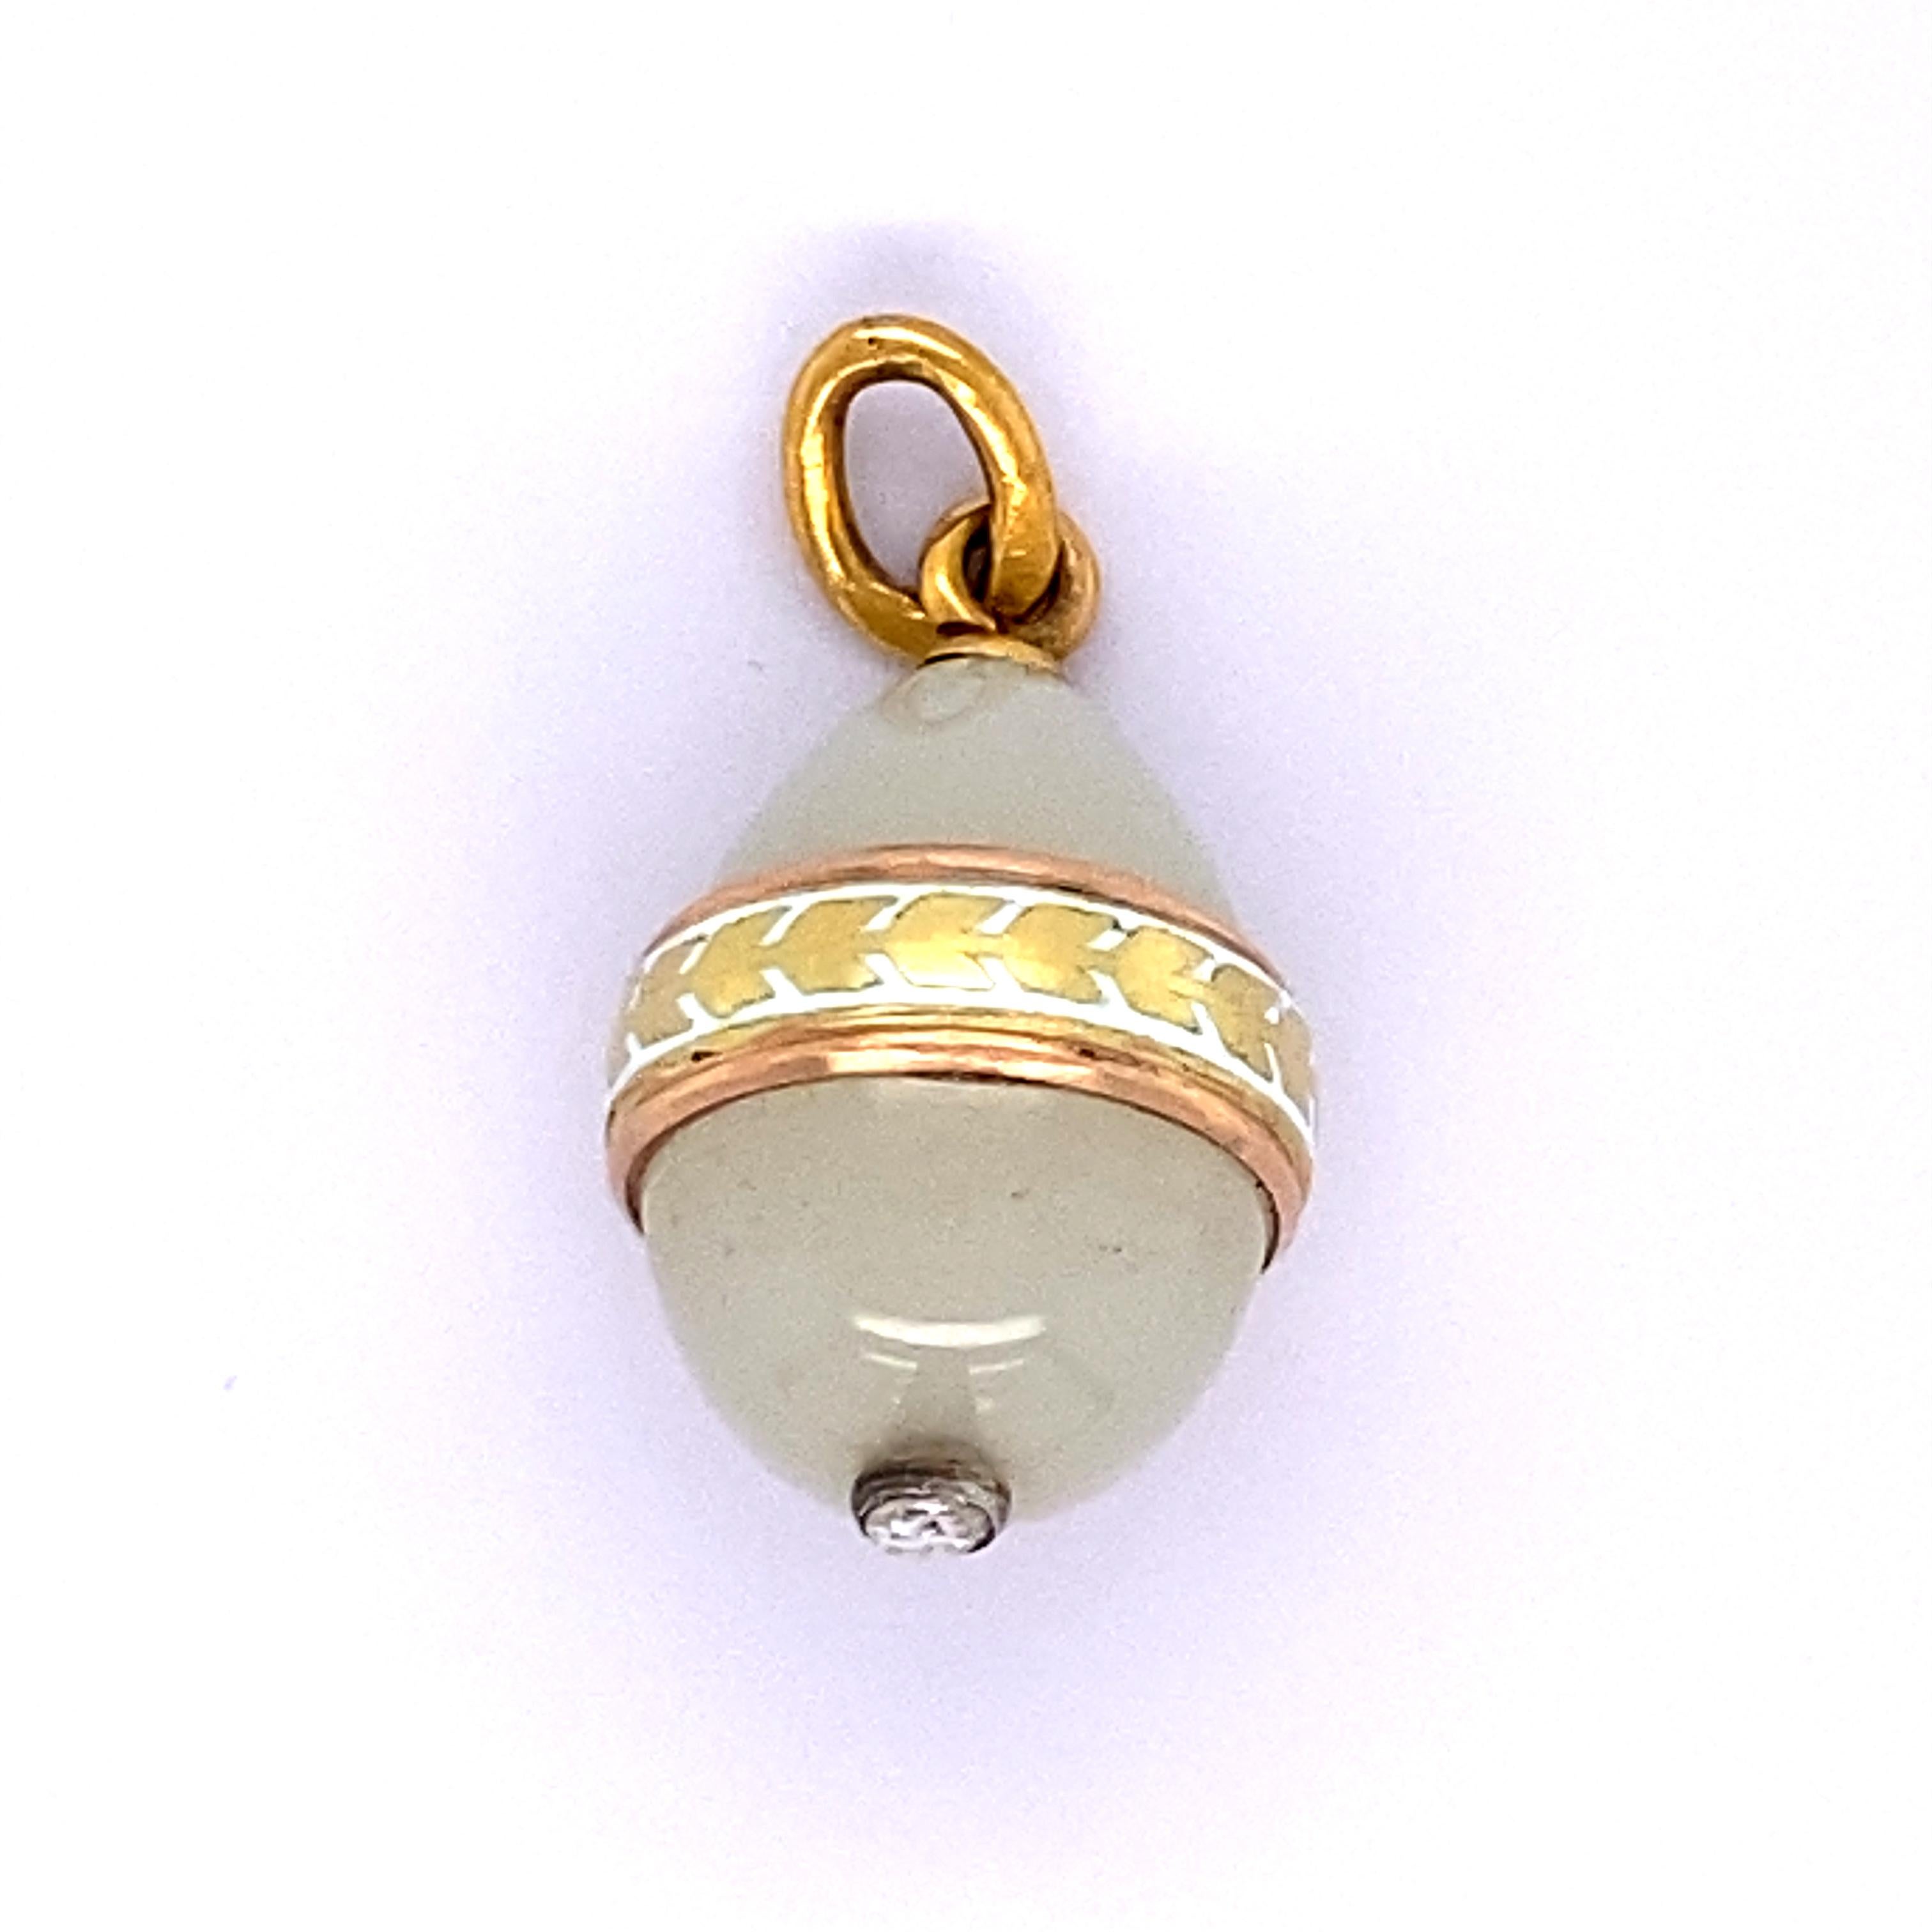 Faberge egg pendant , off- white agate stone set with rose cut diamond and enamel work.  weighing 4.2 g / 2.70 dwt